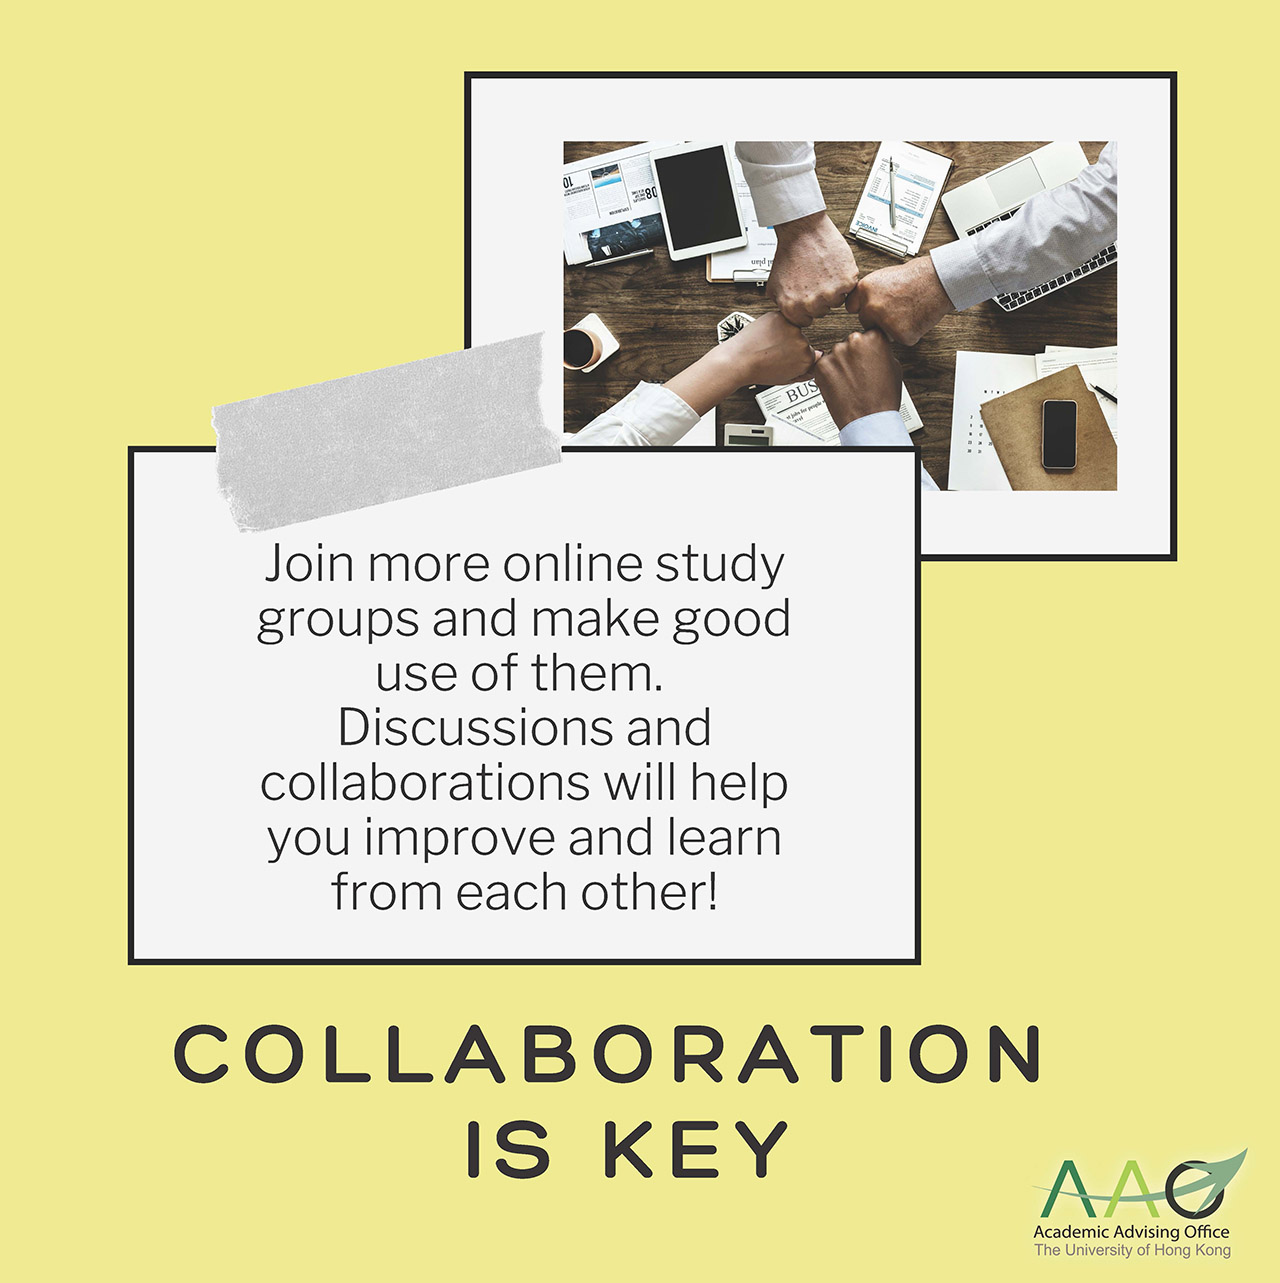 Collaboration is key. Join more online study groups and make good use of them. Discussions and collaborations will help you improve and learn from each other!